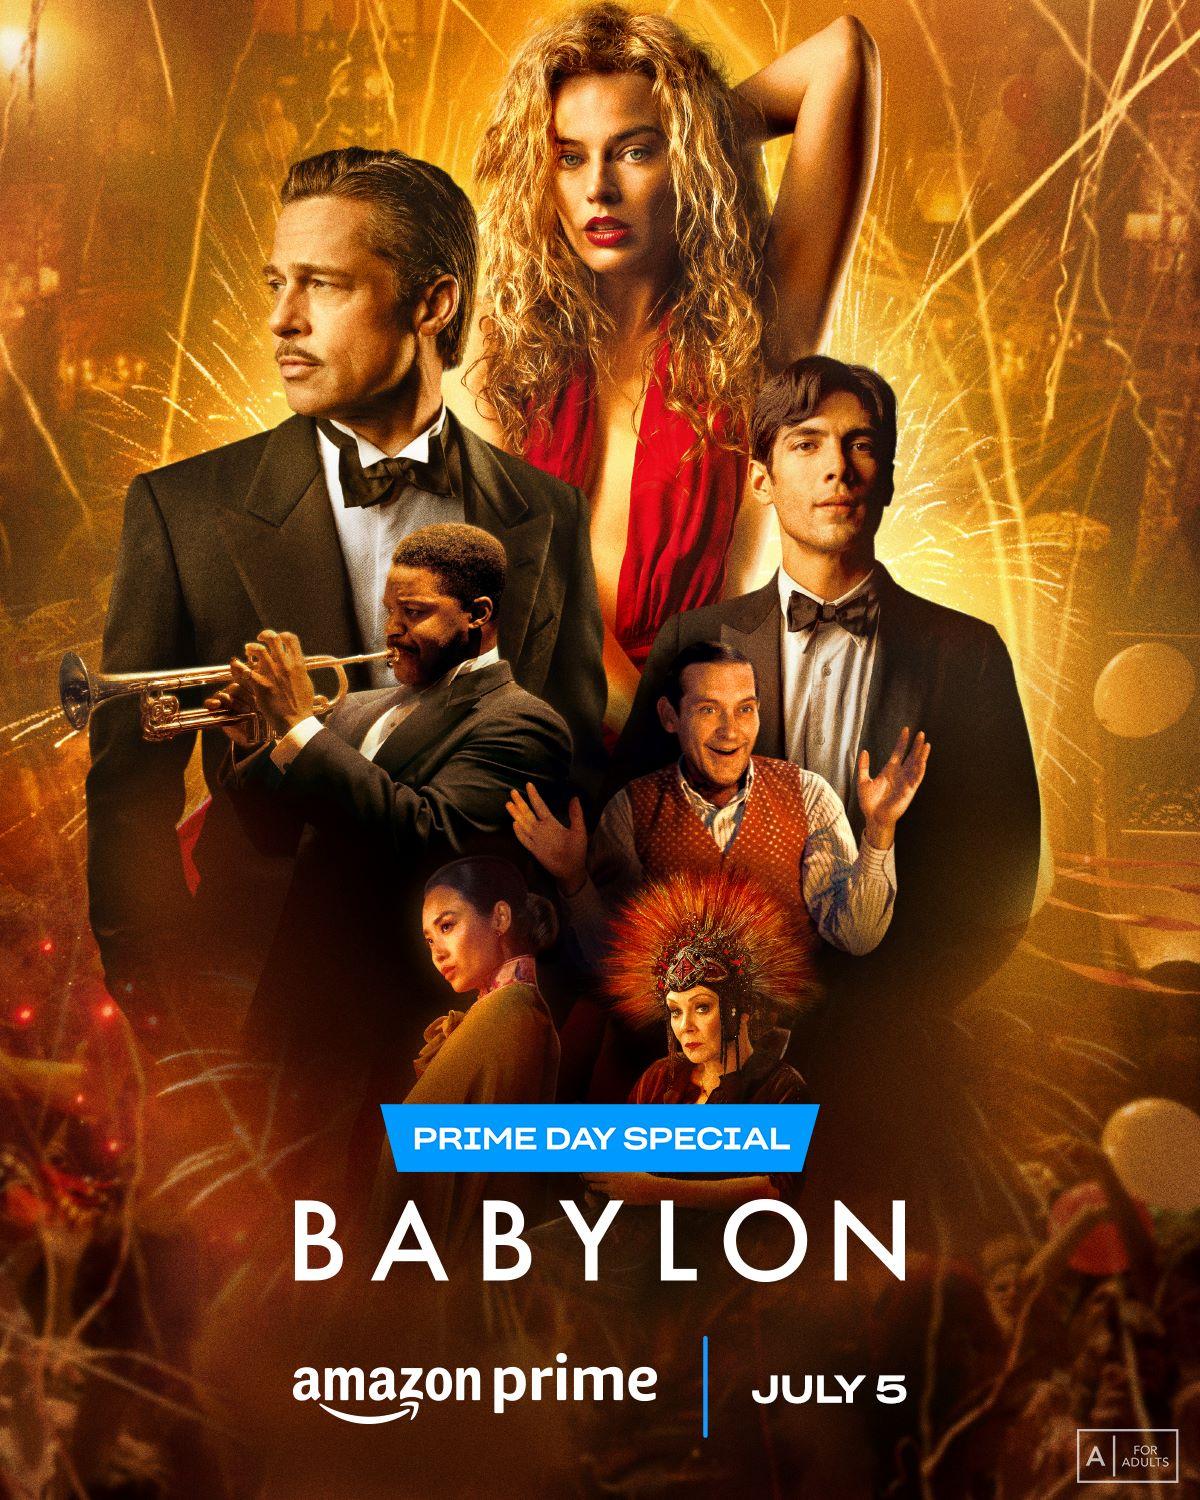 Brad Pitt and Margot Robbie’s electrifying chemistry is reason enough to watch ‘Babylon’, a movie about the decadence and outrageous excessiveness of ambitious dreamers in the 1920s